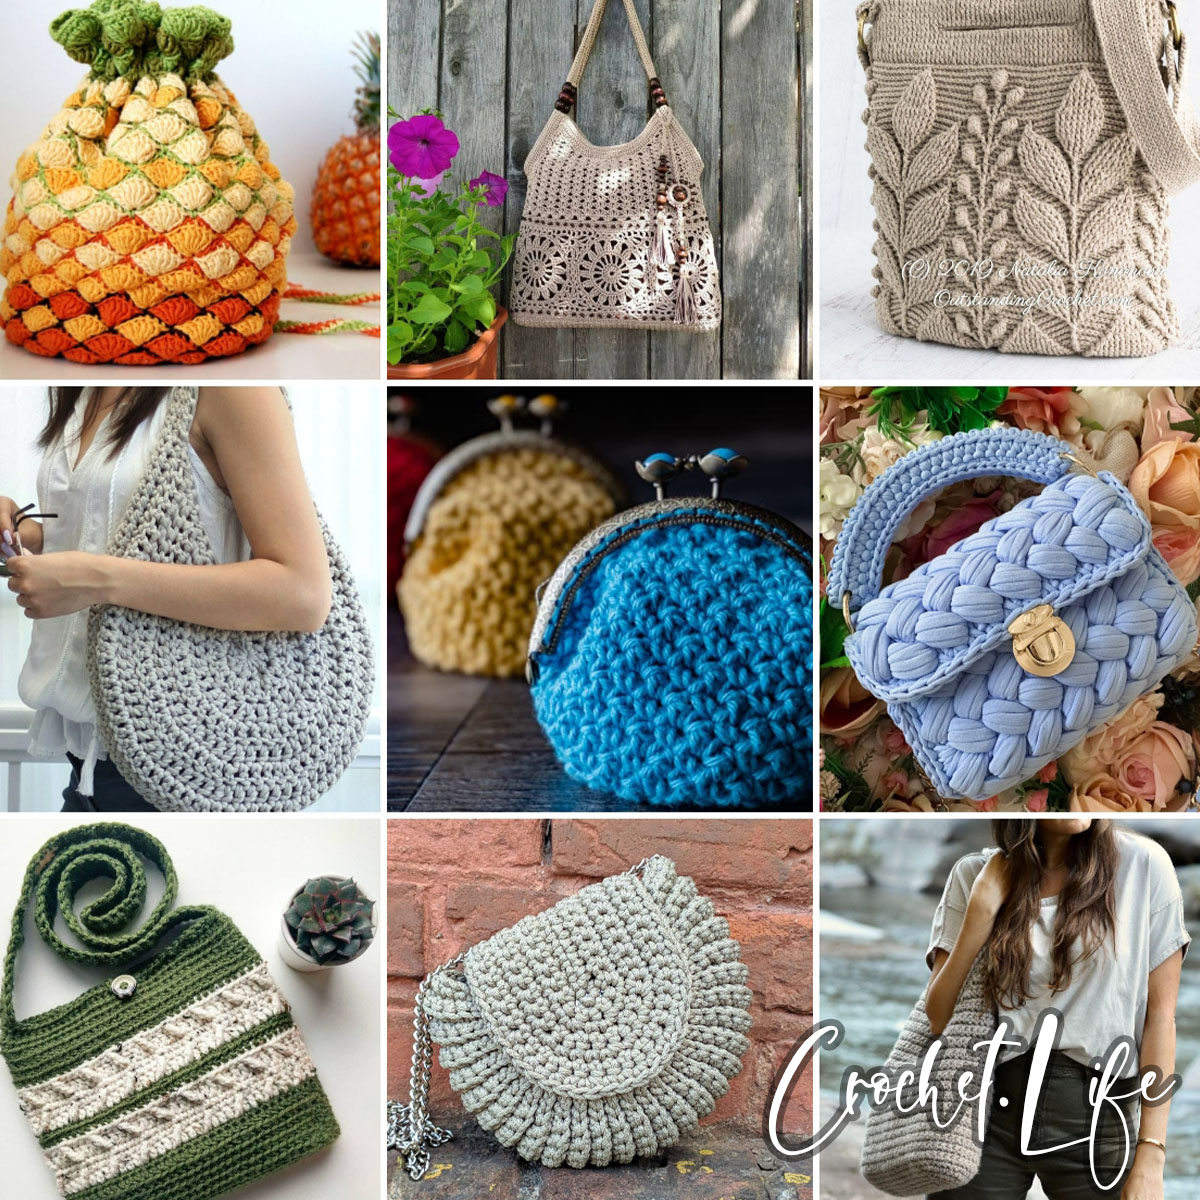 Quilt Inspiration: Free pattern day: Purses, Handbags and zipper bags